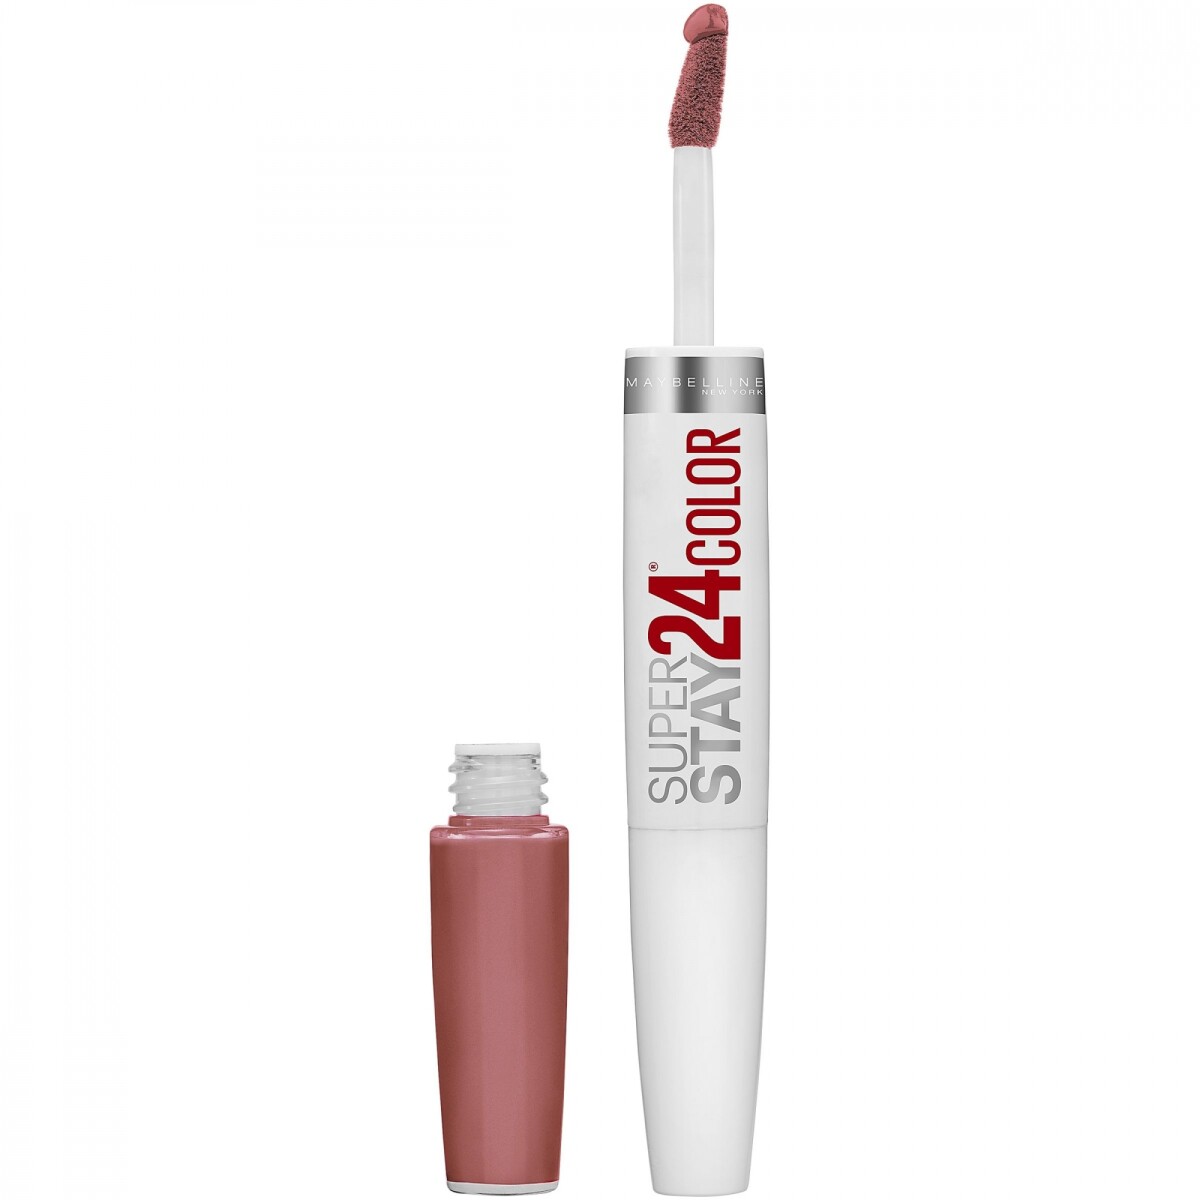 Maybelline Labial Liquido Superstay 24 hrs - Frosted Mauve nº300 